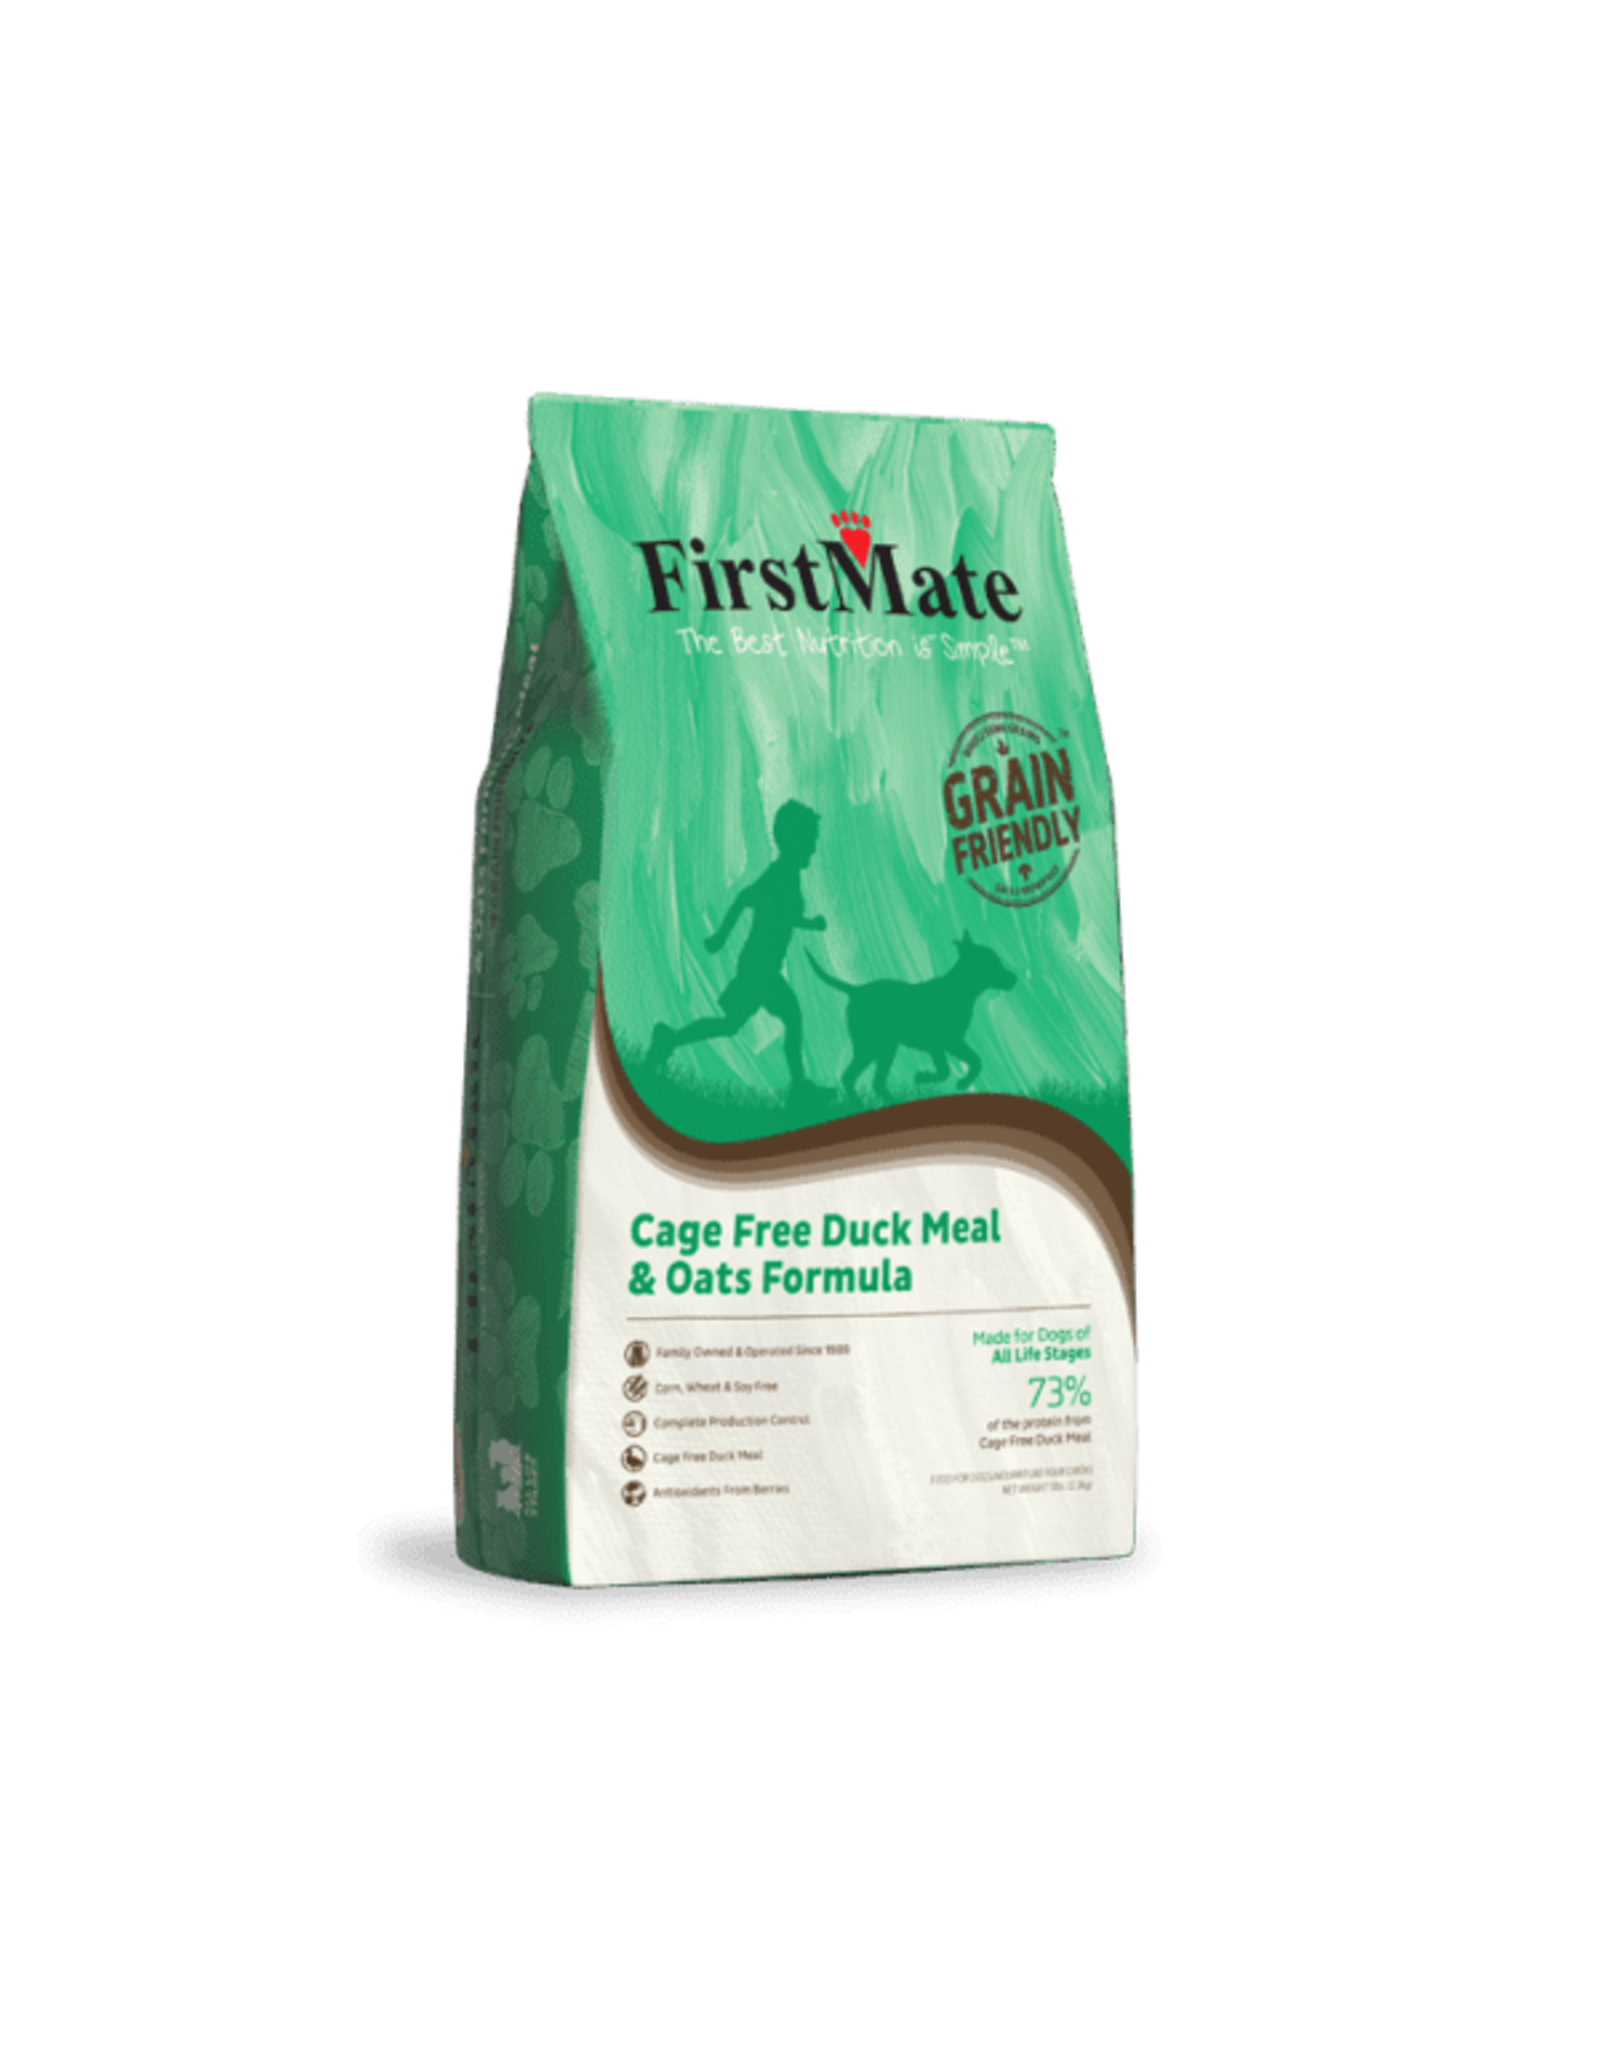 First Mate First Mate Dog Grain Friendly Duck Meal and Oats Formula